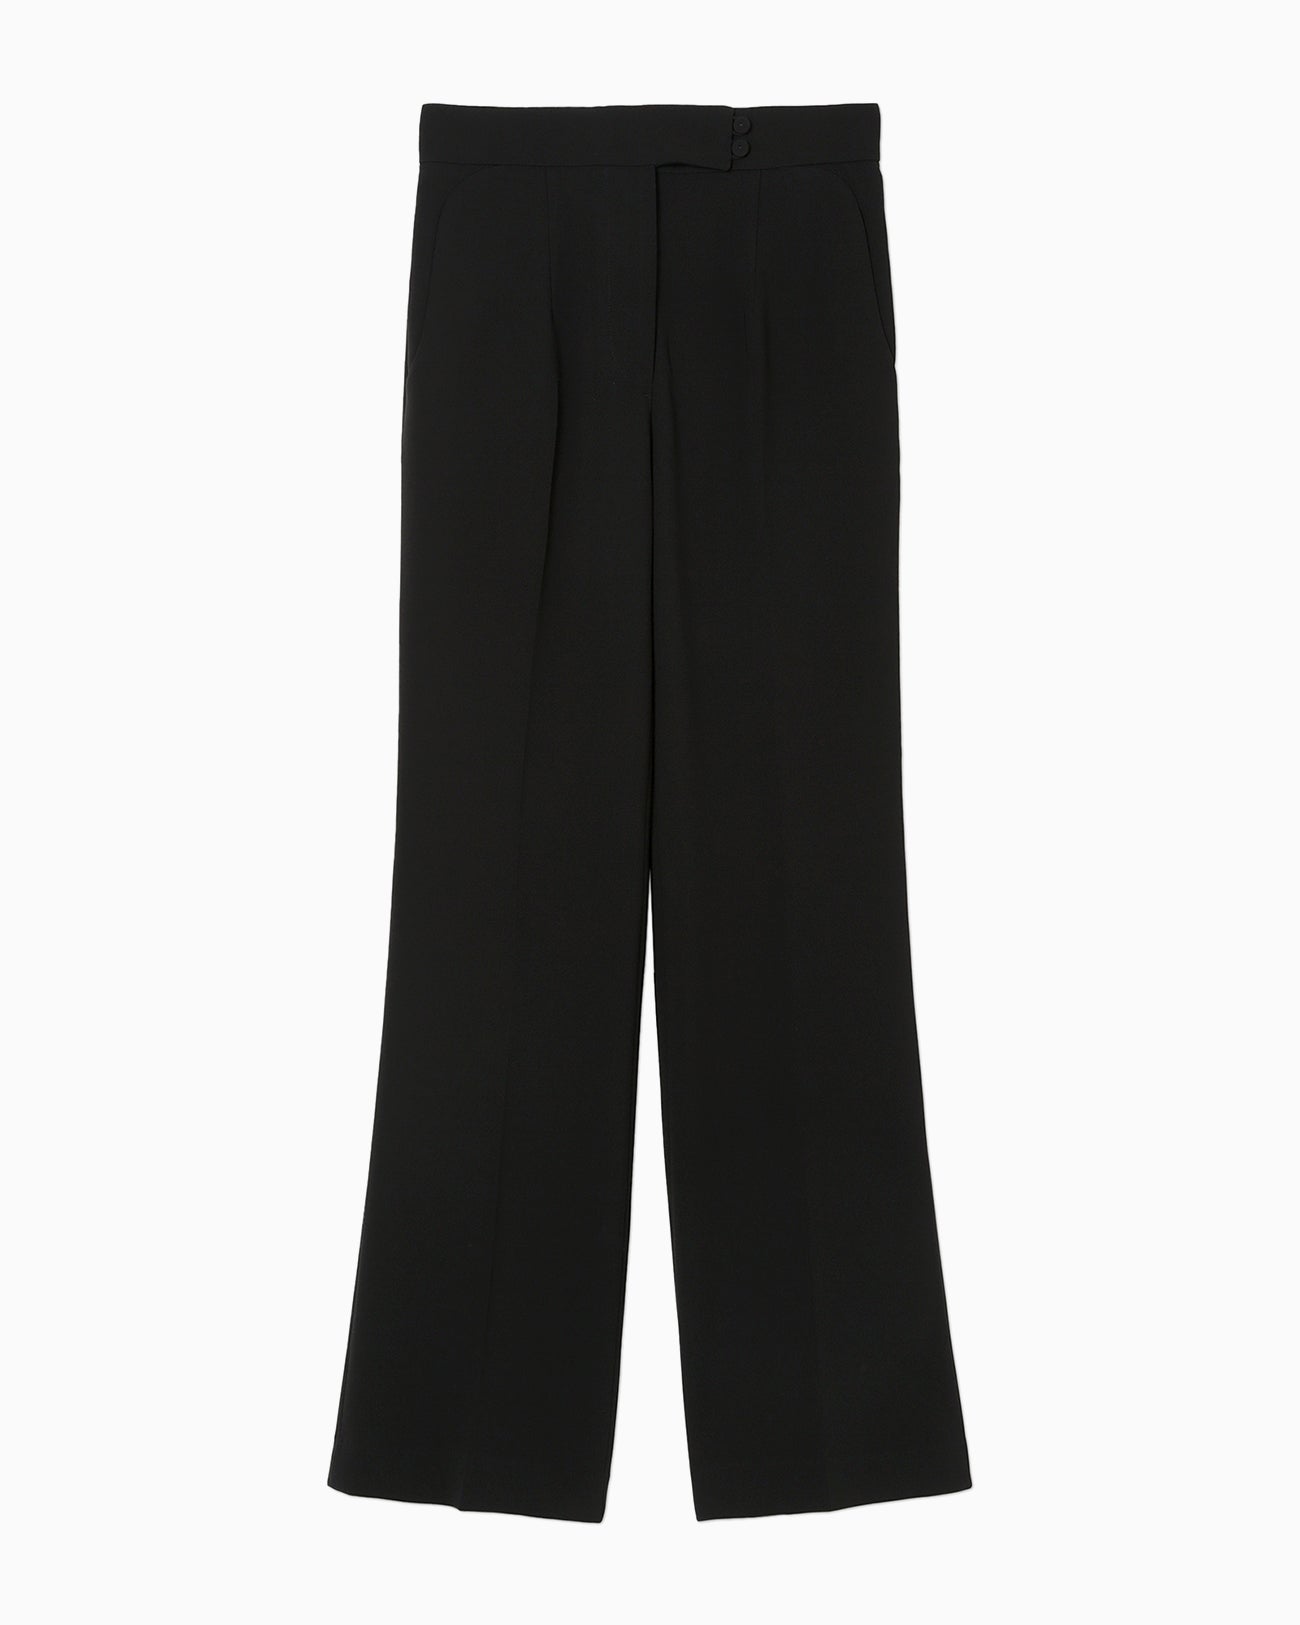 High Waisted Center Creased Suit Trousers - black